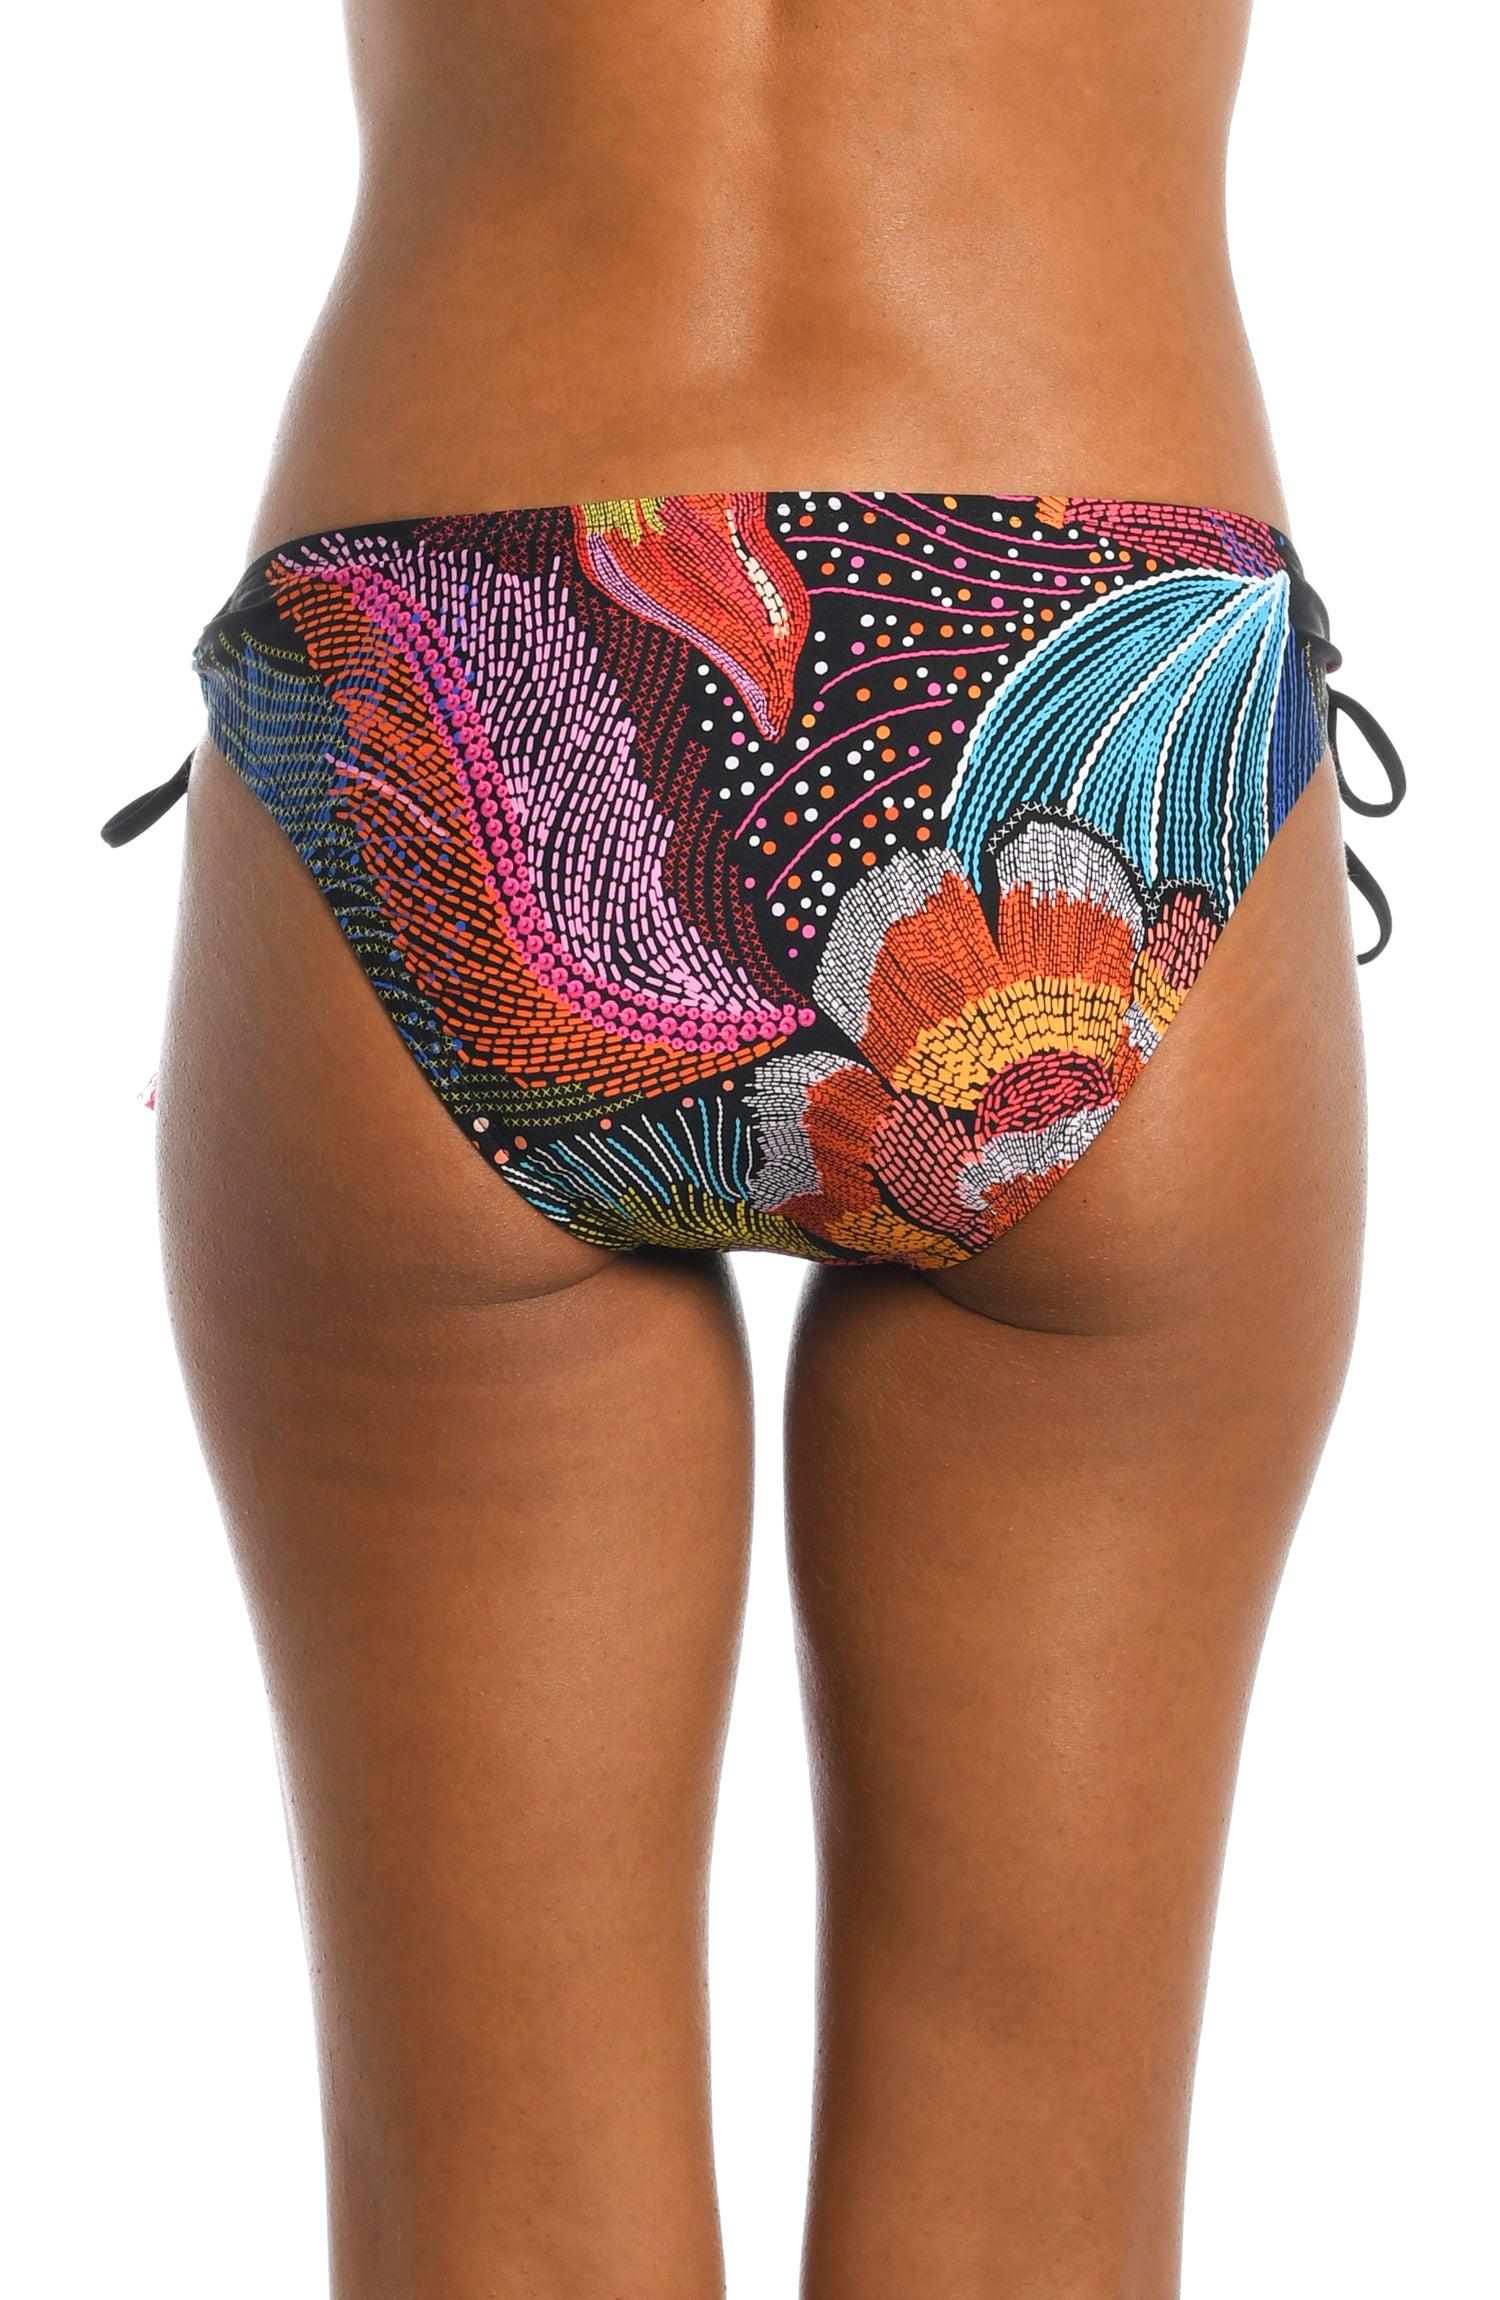 Model is wearing a shiny multicolored tropical printed side tie hipster bottom from our Sunlit Soriee collection!